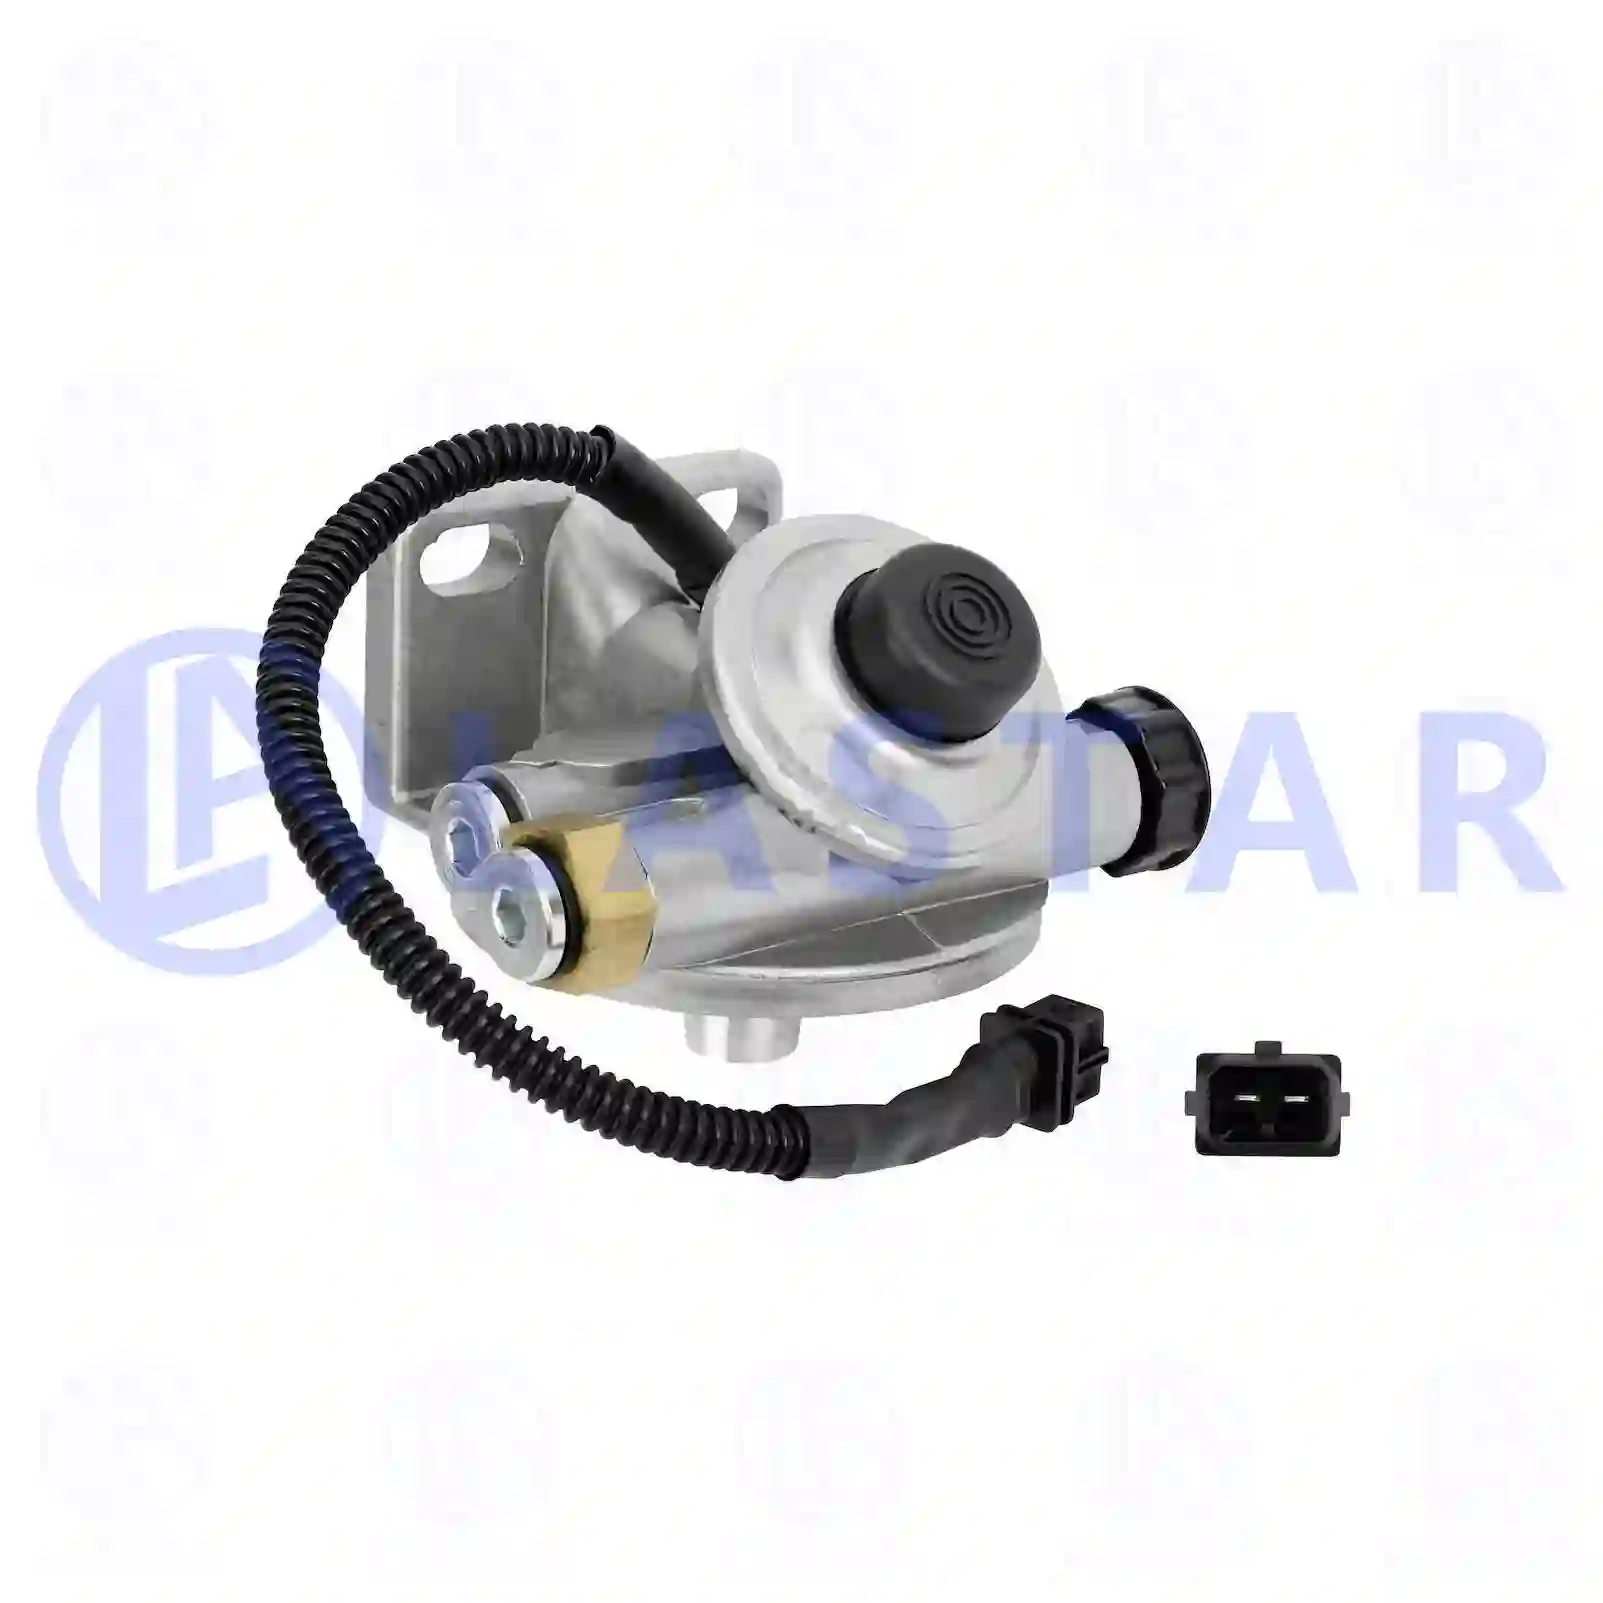 Filter head, water separator, heated, 77723774, 4004770108, 0004774508, ZG10105-0008 ||  77723774 Lastar Spare Part | Truck Spare Parts, Auotomotive Spare Parts Filter head, water separator, heated, 77723774, 4004770108, 0004774508, ZG10105-0008 ||  77723774 Lastar Spare Part | Truck Spare Parts, Auotomotive Spare Parts